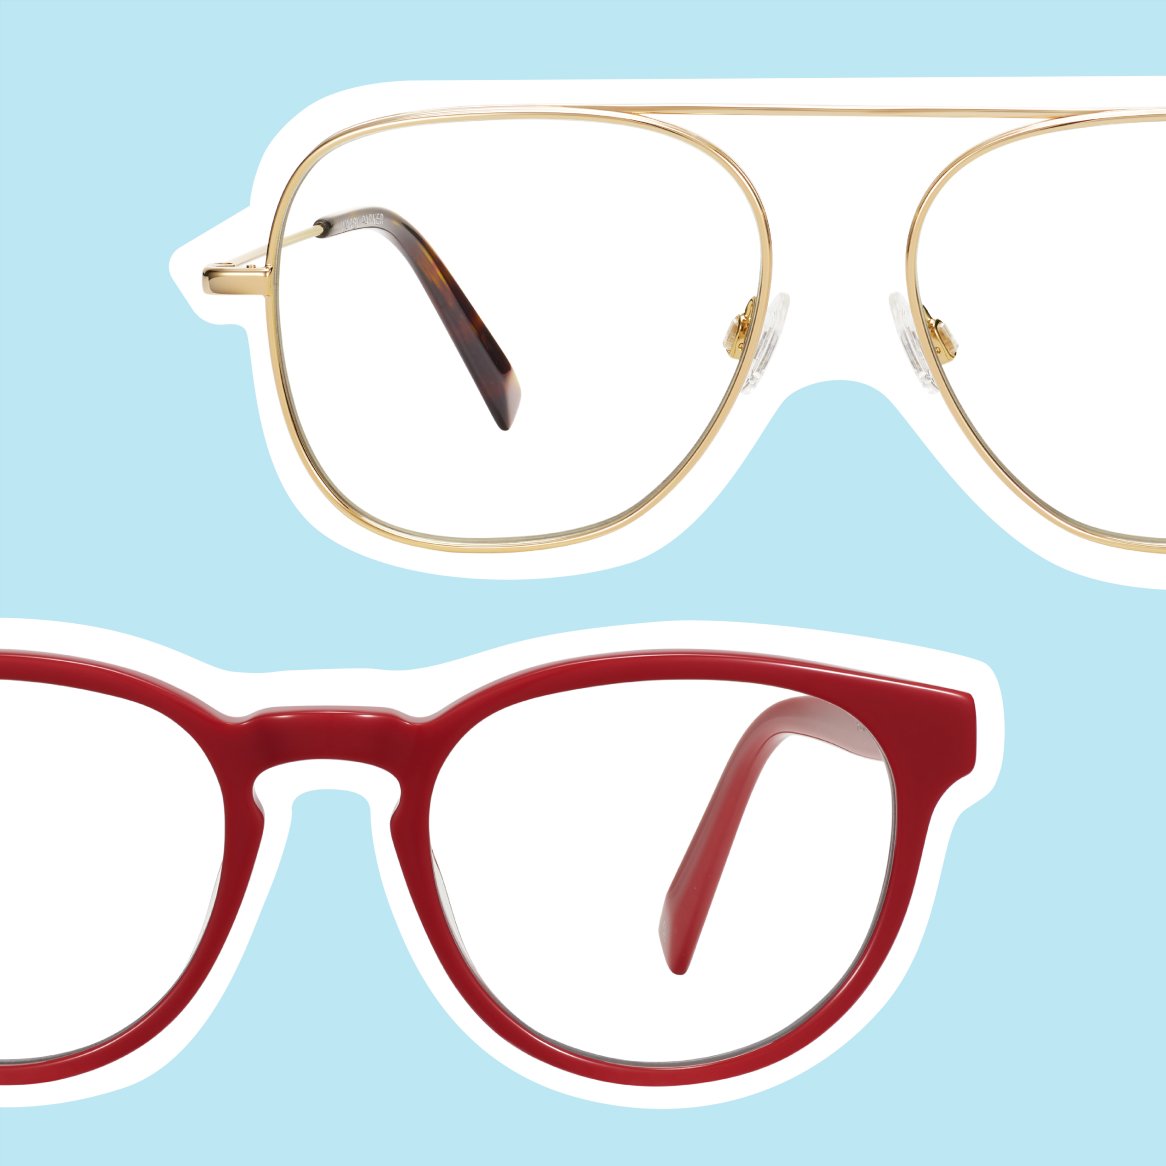 Image featuring two vintage 70's eyeglass styles